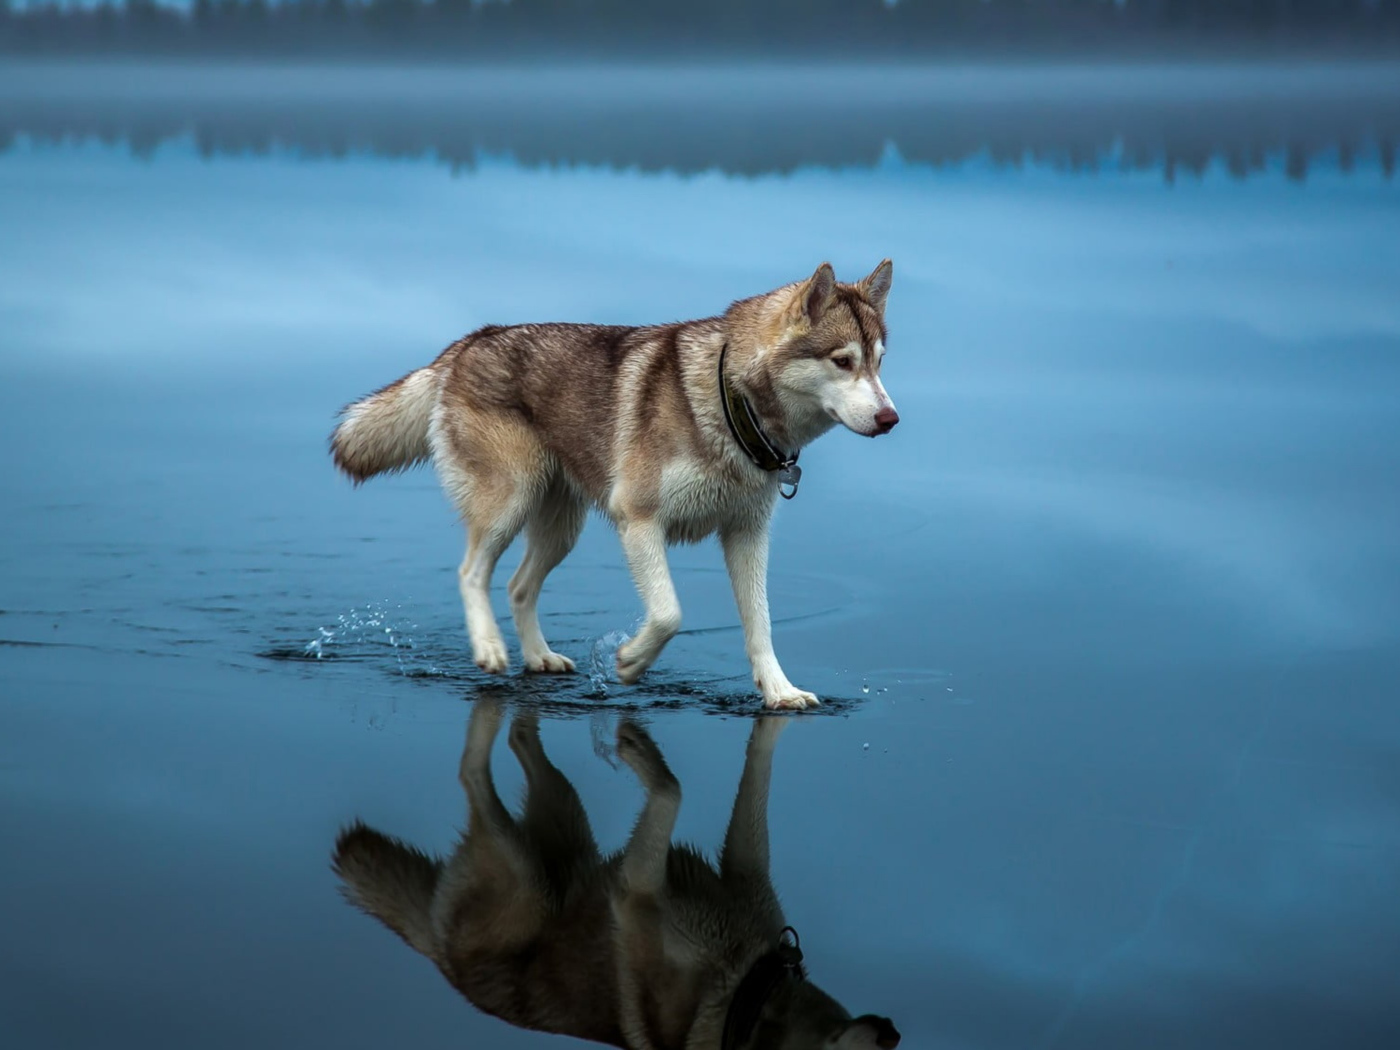 Husky is on the water